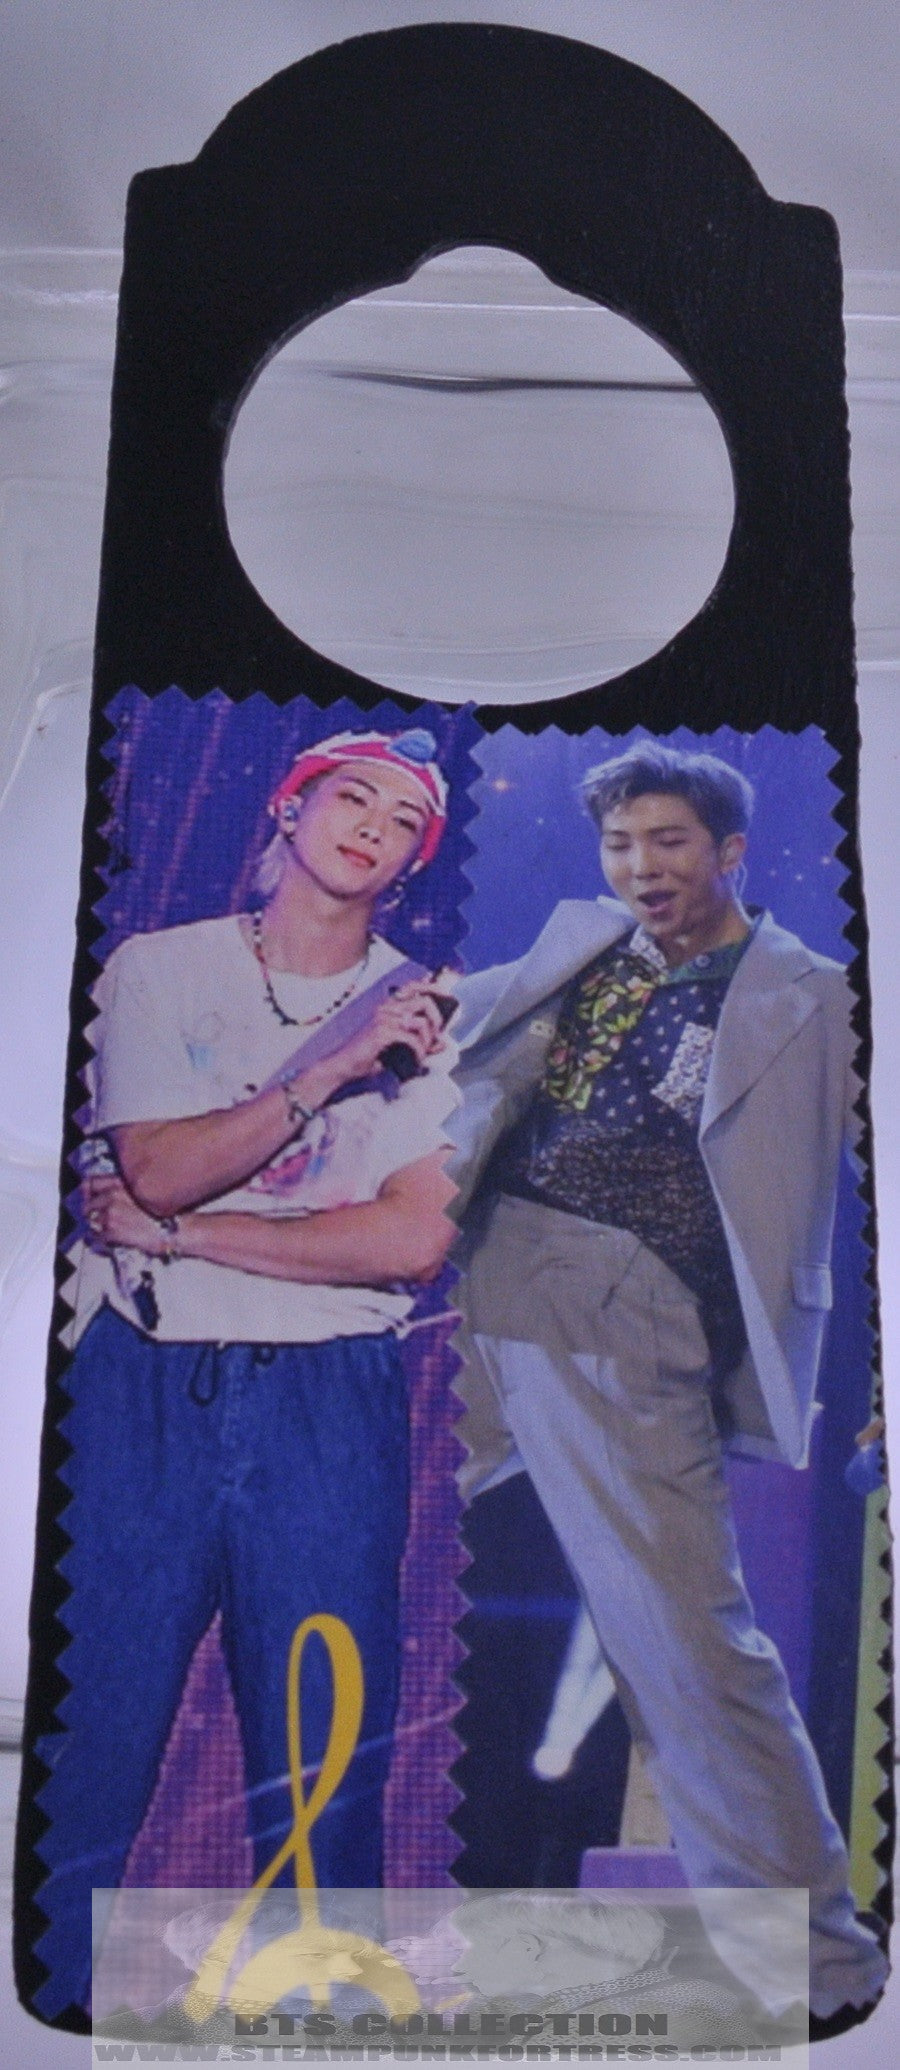 BTS RM KIM NAMJOON BLACK 2 SIDED DOOR HANGER CAN PERSONALIZE WELCOME STAY OUT